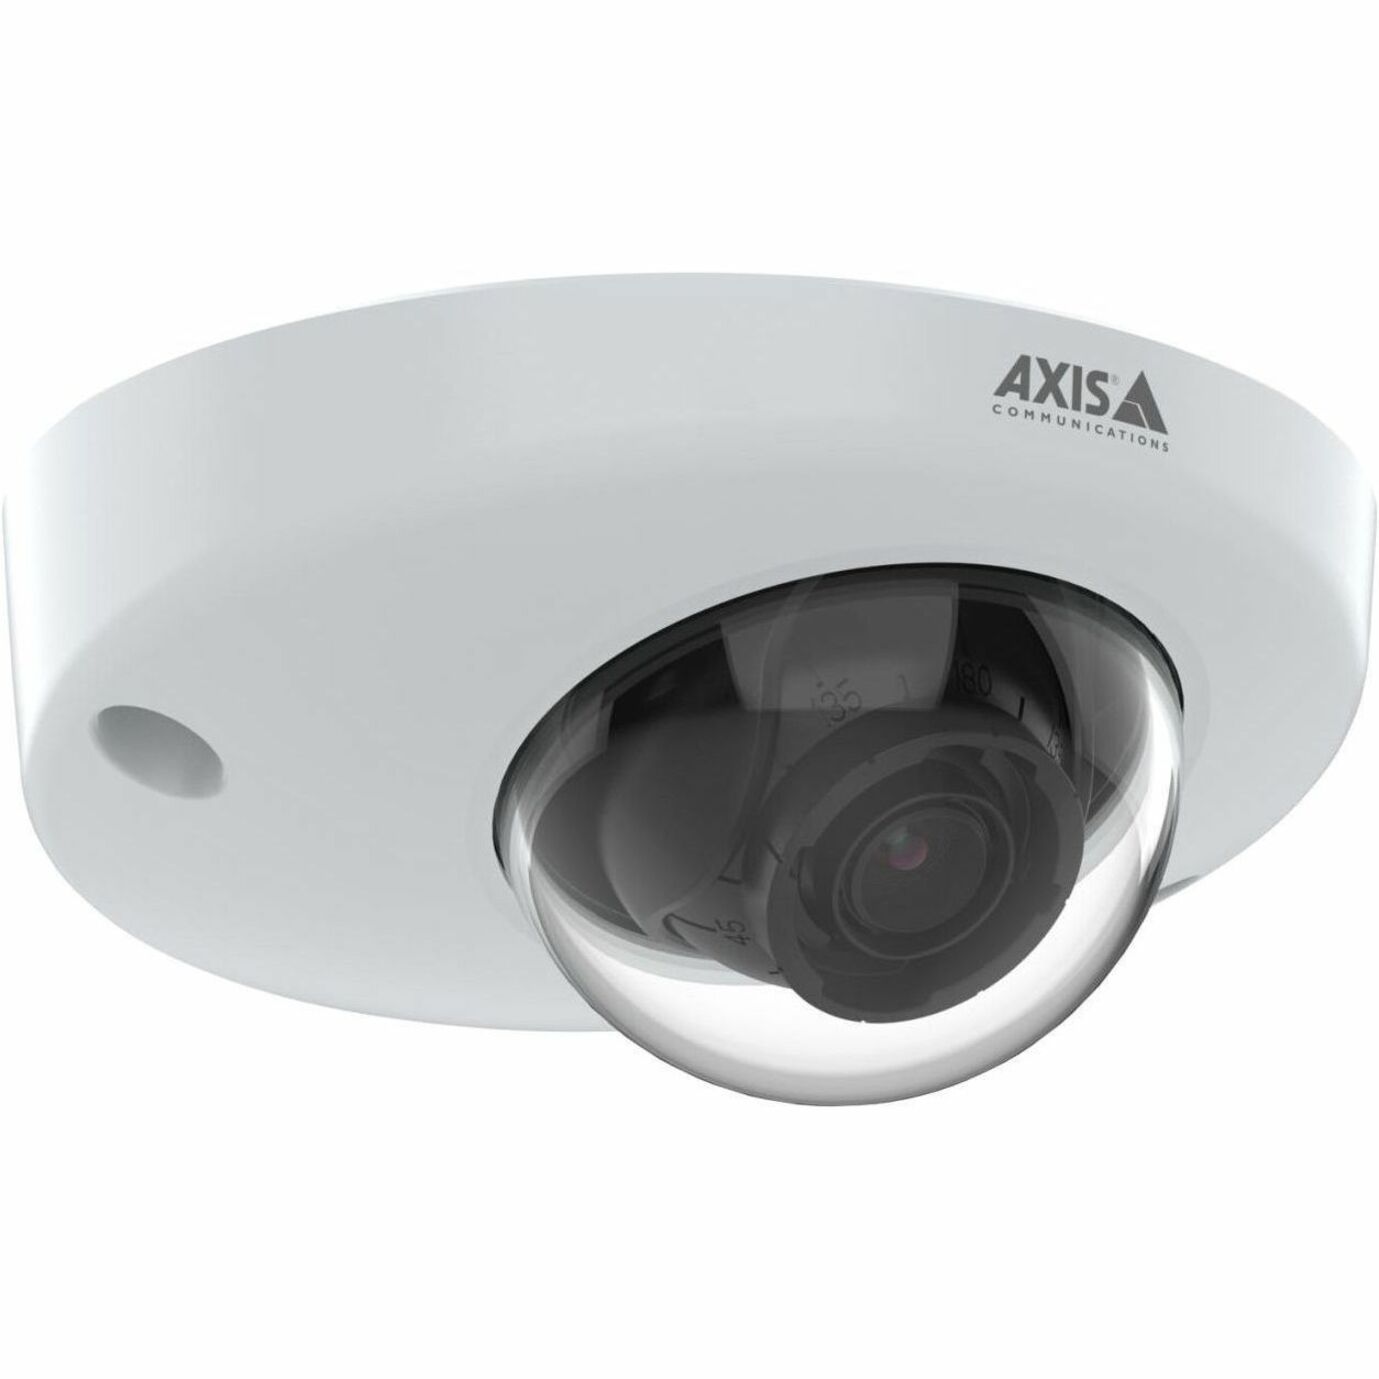 AXIS 02501-001 WizMind M3905-R Dome Camera, Outdoor, 2 Megapixel, Full HD, PoE